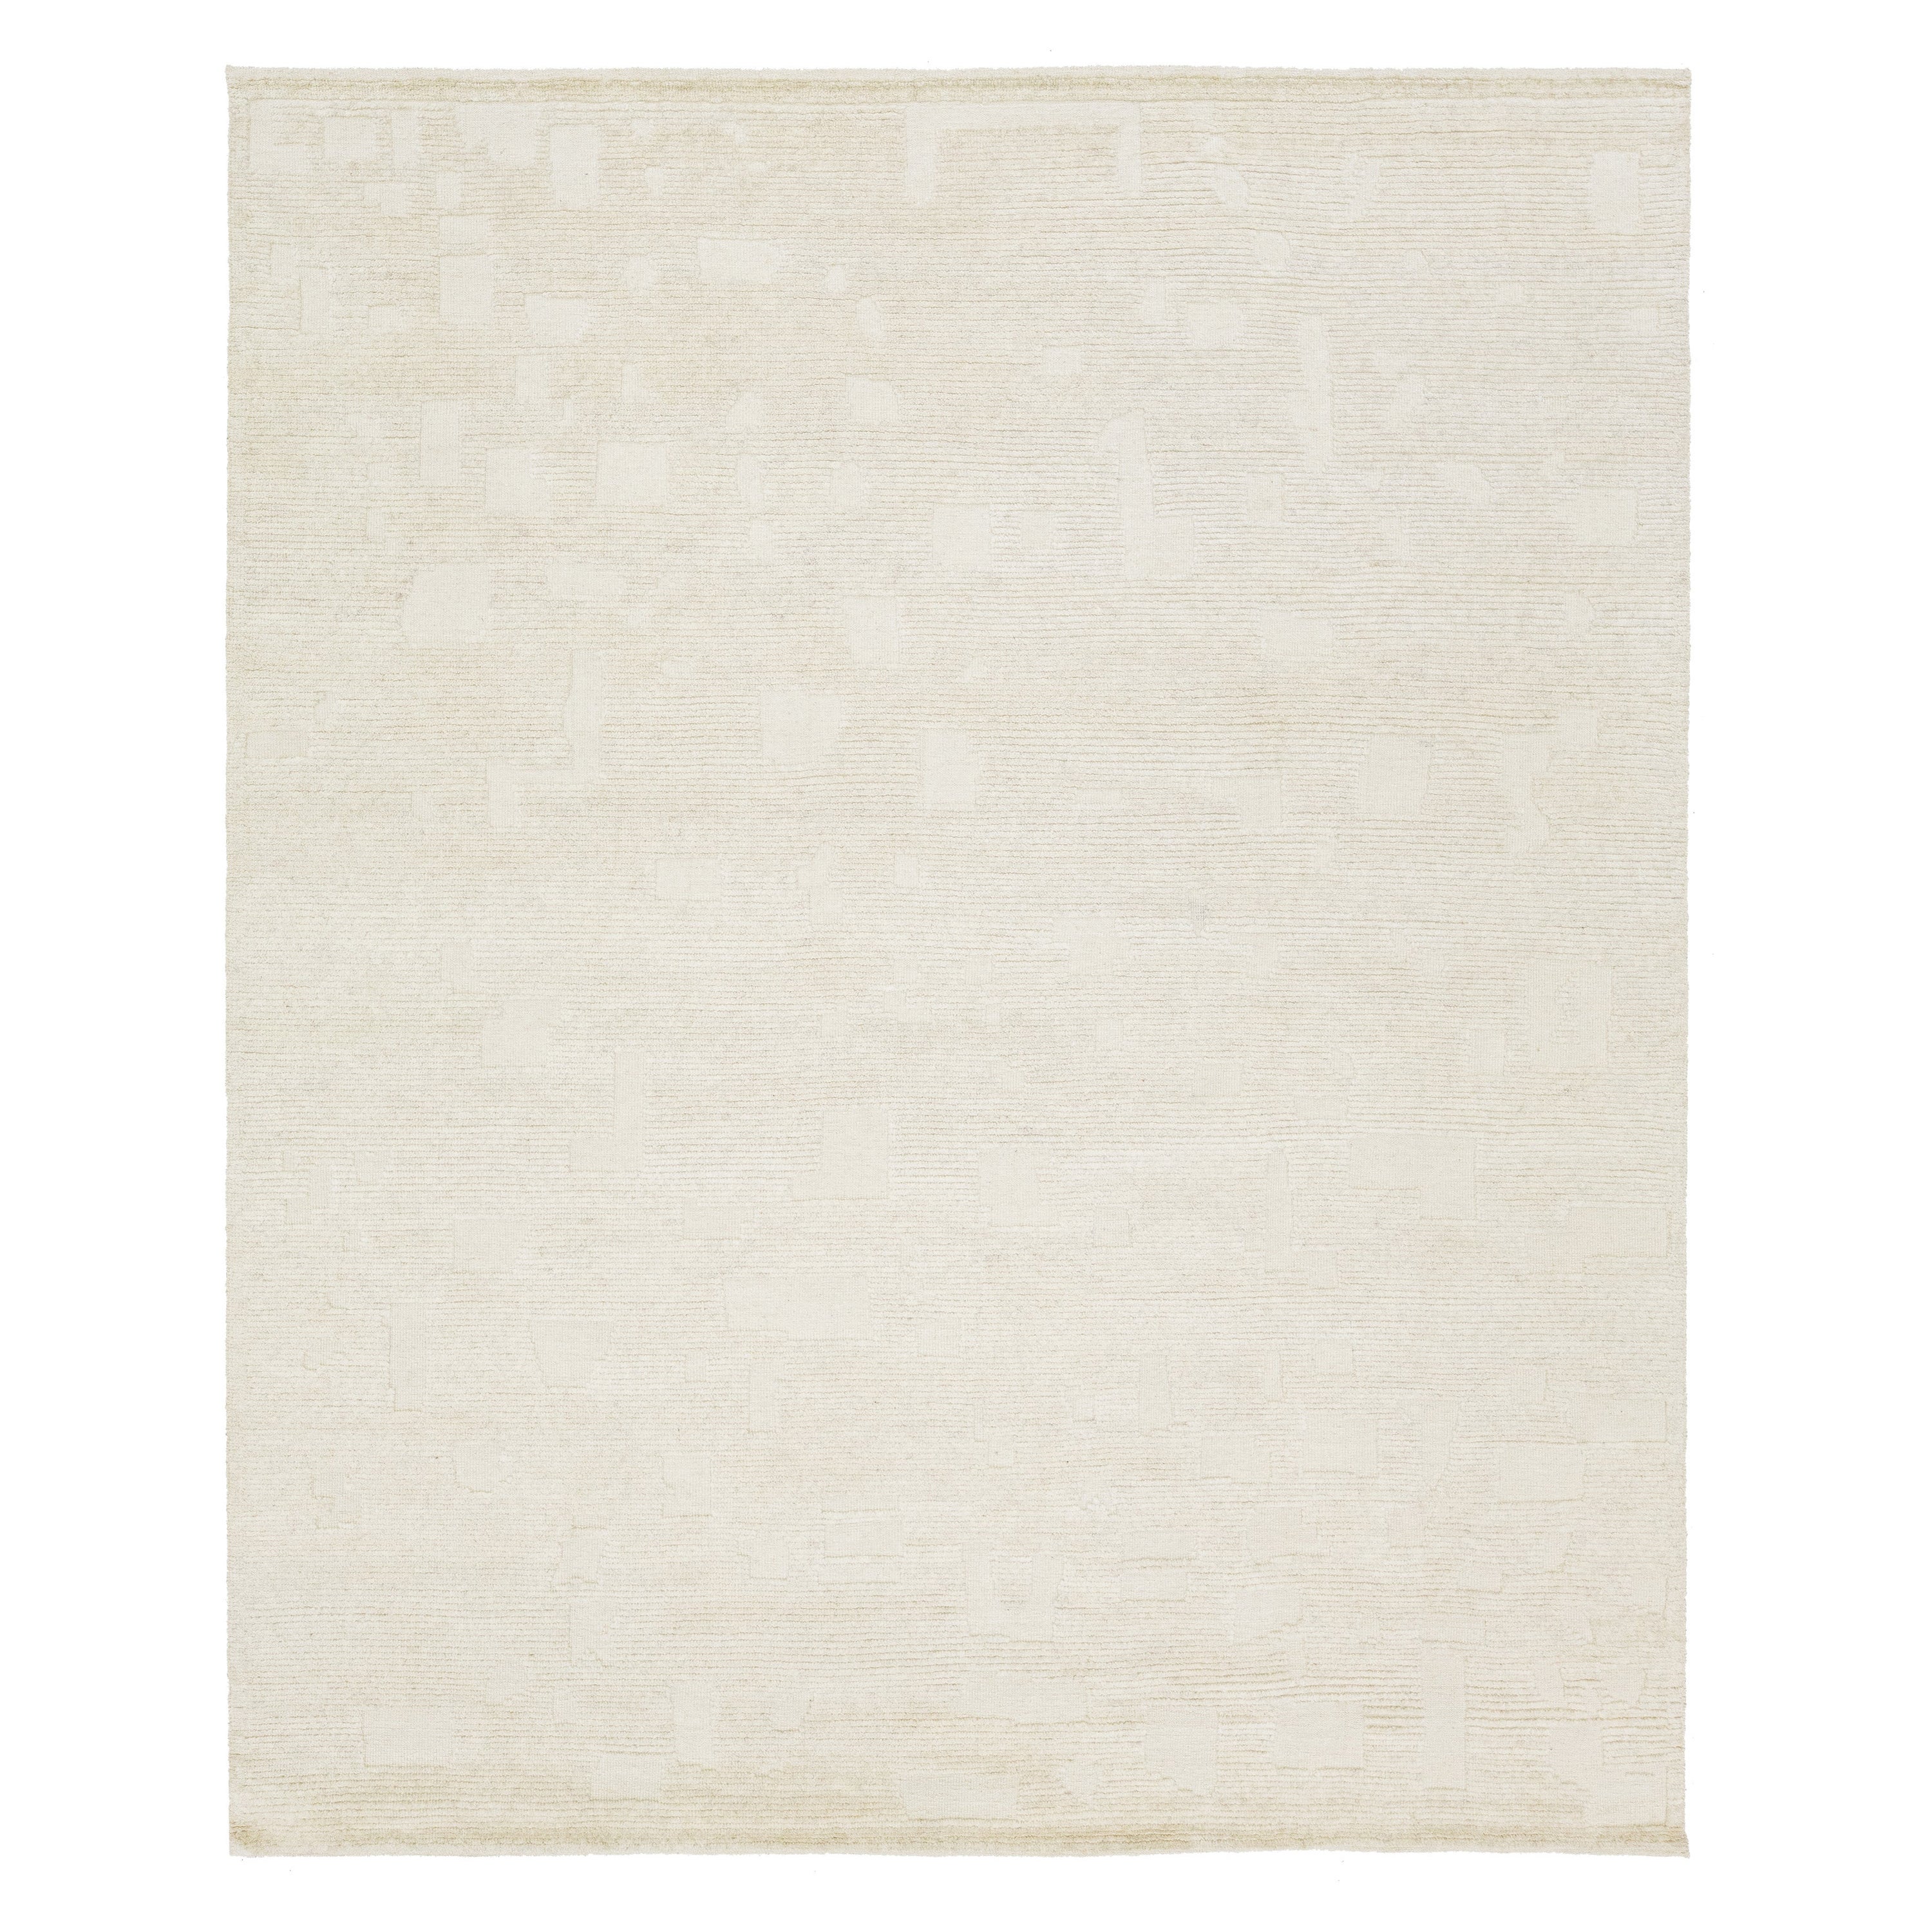 Modern Ivory Moroccan Style Wool Rug by Apadana Features a Minimalist Motif For Sale